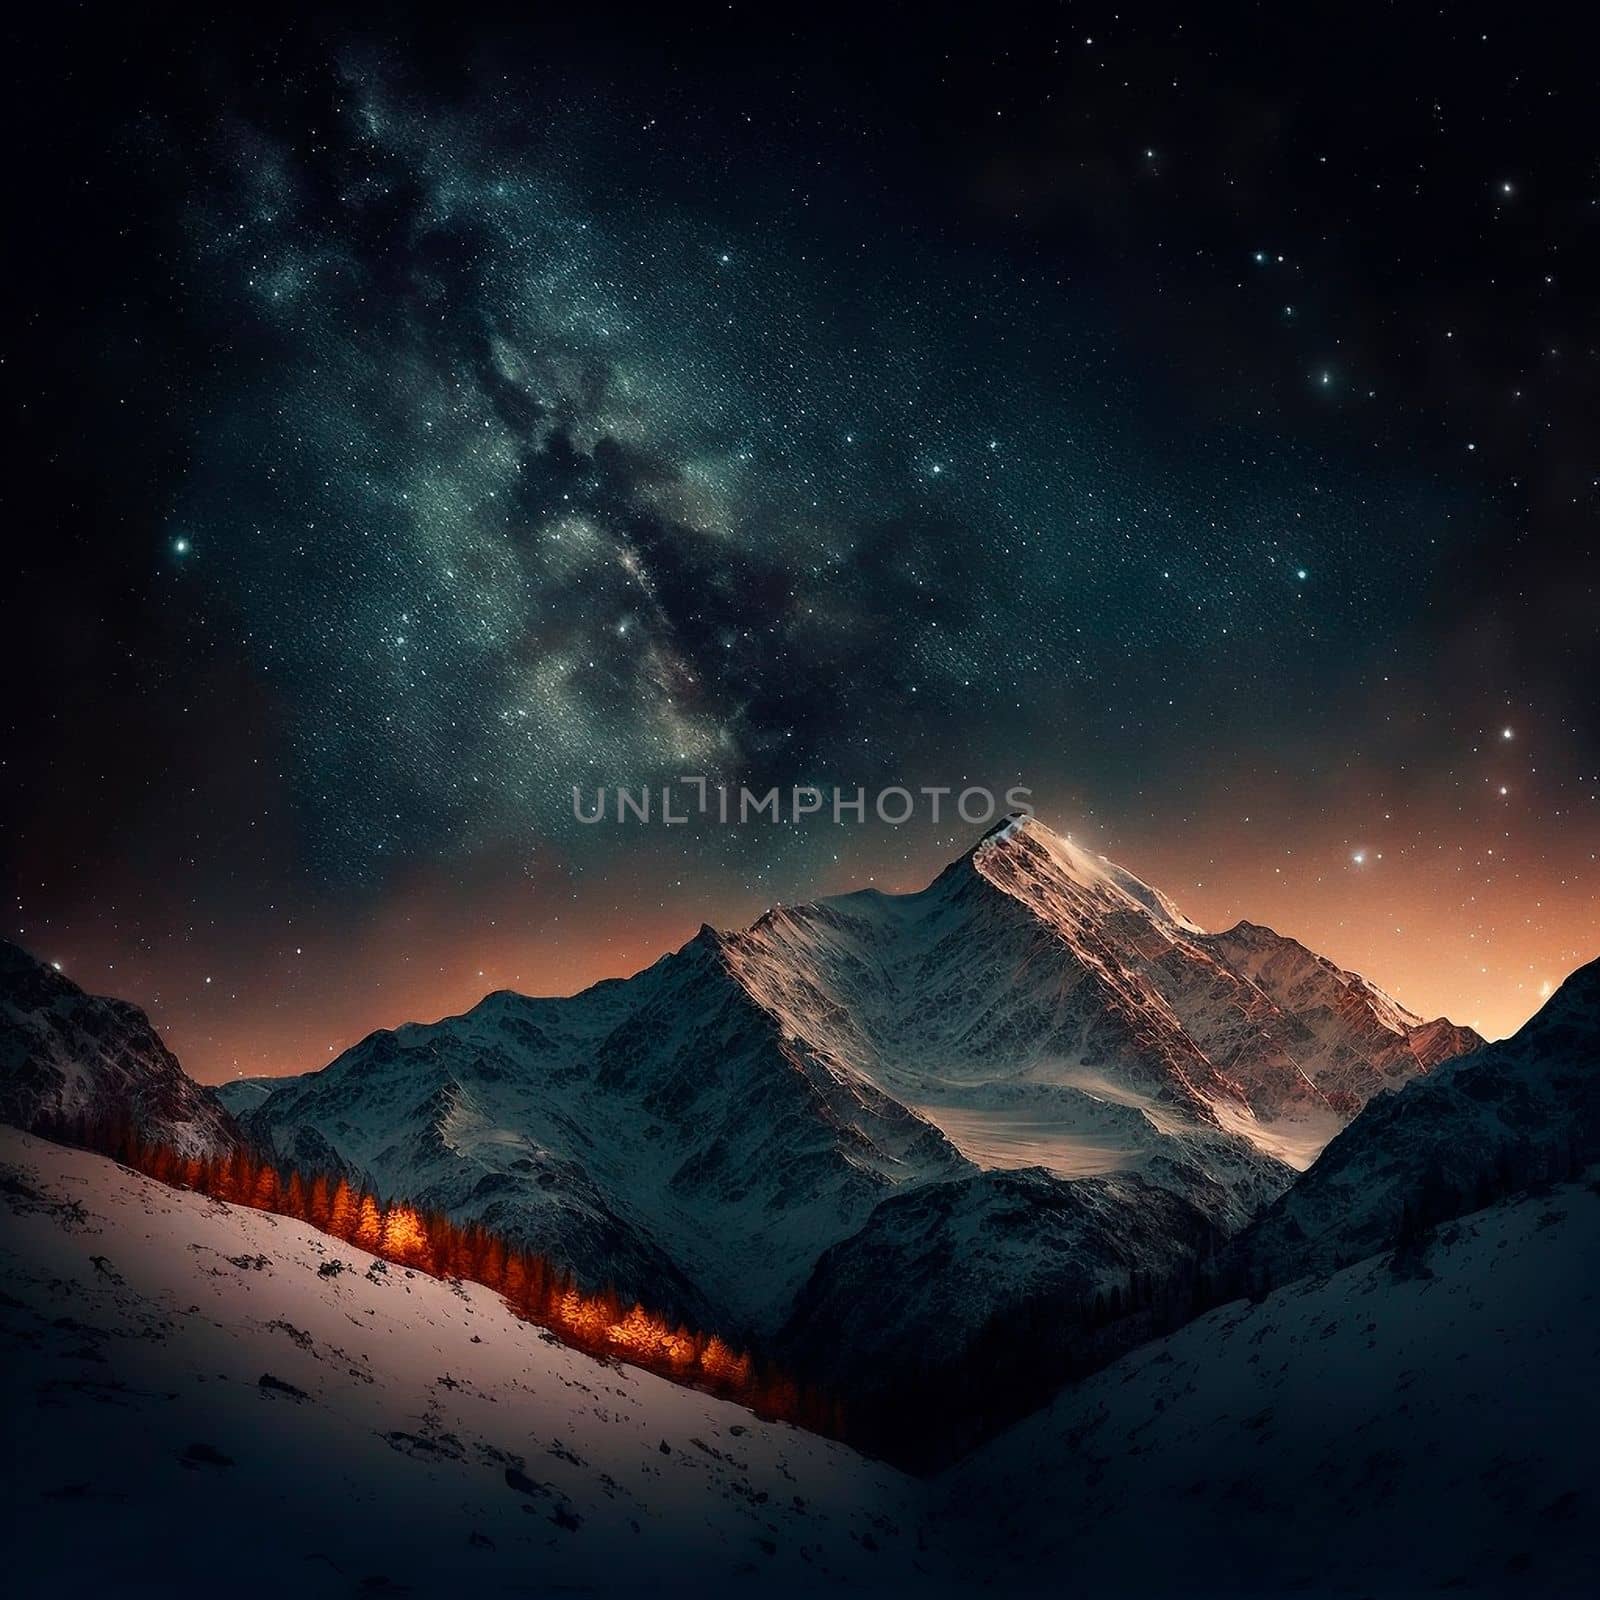 Mountains under the starry sky by NeuroSky